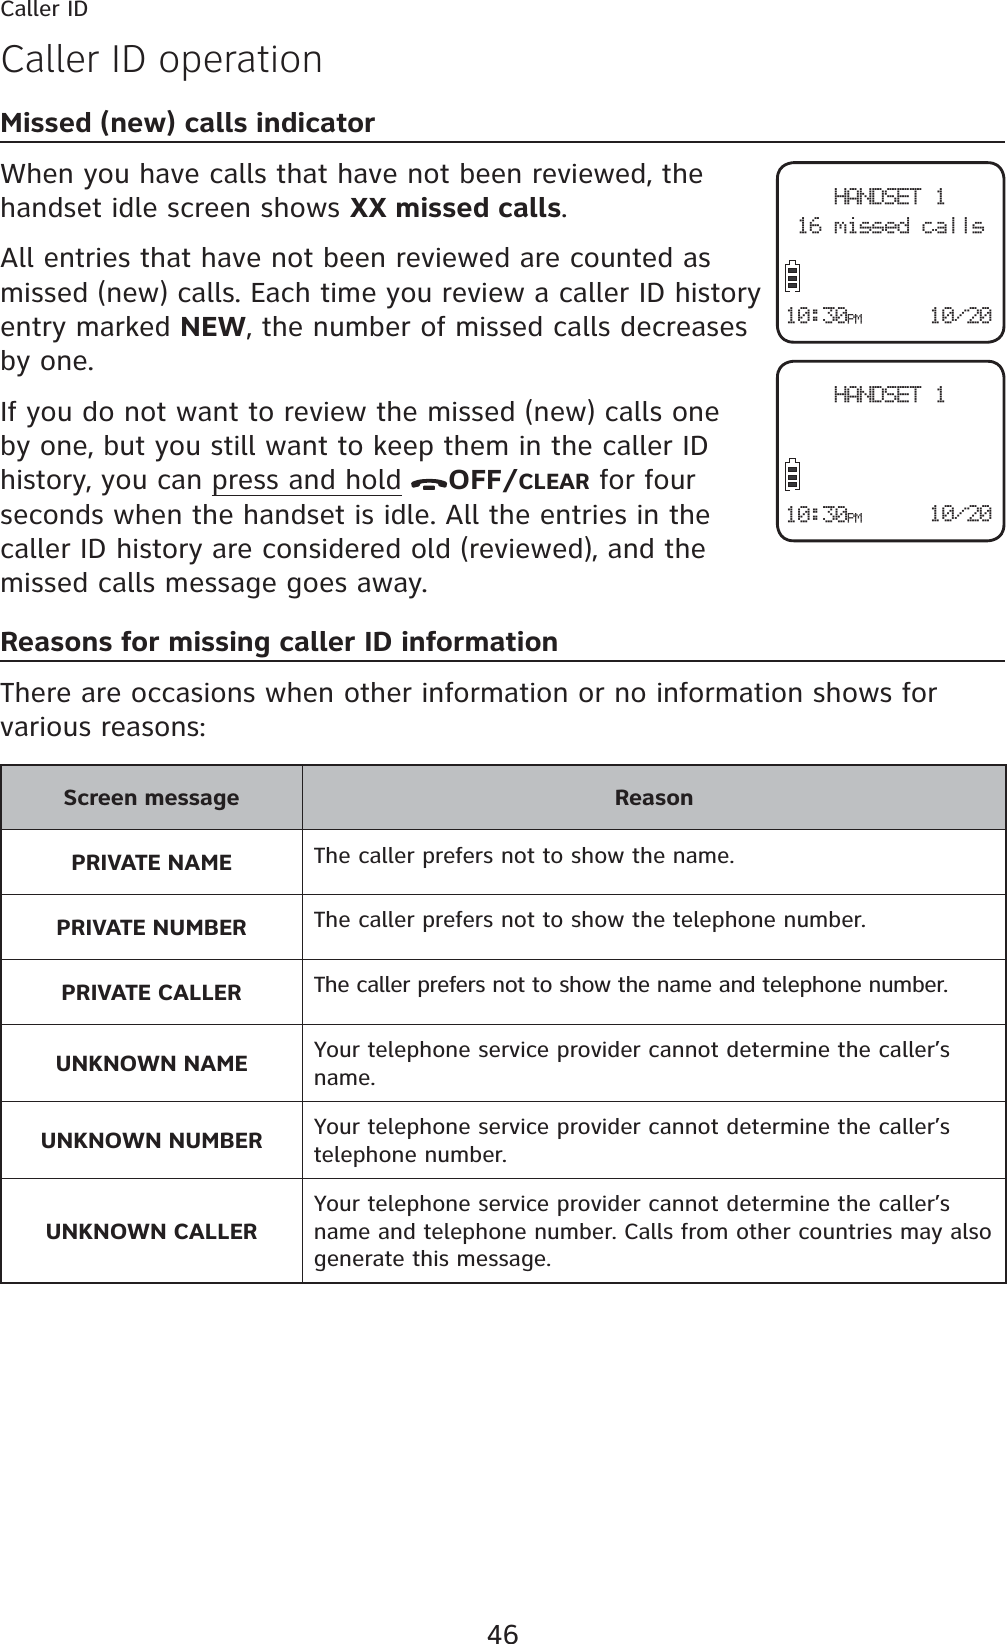 46Caller IDMissed (new) calls indicatorWhen you have calls that have not been reviewed, the handset idle screen shows XX missed calls.All entries that have not been reviewed are counted as missed (new) calls. Each time you review a caller ID history entry marked NEW, the number of missed calls decreases by one.If you do not want to review the missed (new) calls one by one, but you still want to keep them in the caller ID history, you can press and hold OFF/CLEAR for four seconds when the handset is idle. All the entries in the caller ID history are considered old (reviewed), and the missed calls message goes away.Reasons for missing caller ID informationThere are occasions when other information or no information shows for various reasons:Screen message ReasonPRIVATE NAME The caller prefers not to show the name.PRIVATE NUMBER The caller prefers not to show the telephone number.PRIVATE CALLER The caller prefers not to show the name and telephone number.UNKNOWN NAME Your telephone service provider cannot determine the caller’s name.UNKNOWN NUMBER Your telephone service provider cannot determine the caller’s telephone number.UNKNOWN CALLERYour telephone service provider cannot determine the caller’s name and telephone number. Calls from other countries may also generate this message.Caller ID operationHANDSET 116 missed calls10/2010:30PMHANDSET 110/2010:30PM